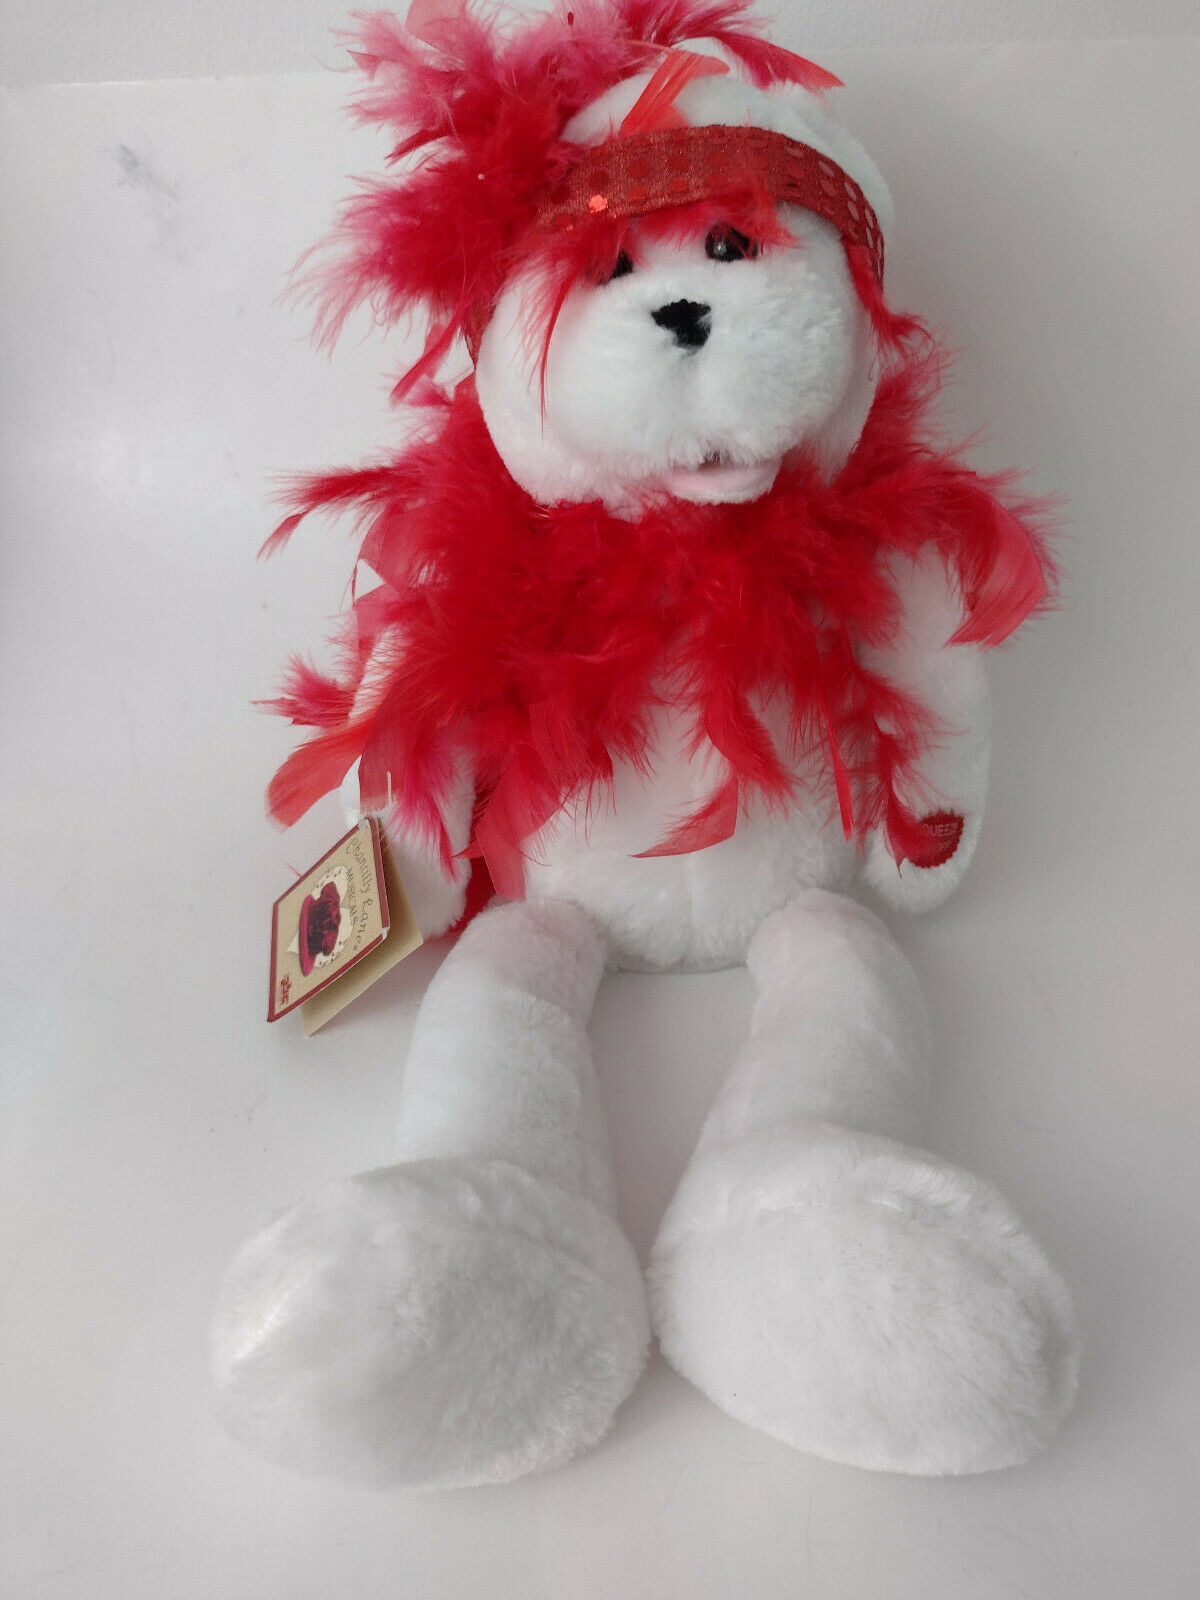 Chantilly Lace Musical Plush Roxie Bear With Red Boa Bear Moves & Sings Toy